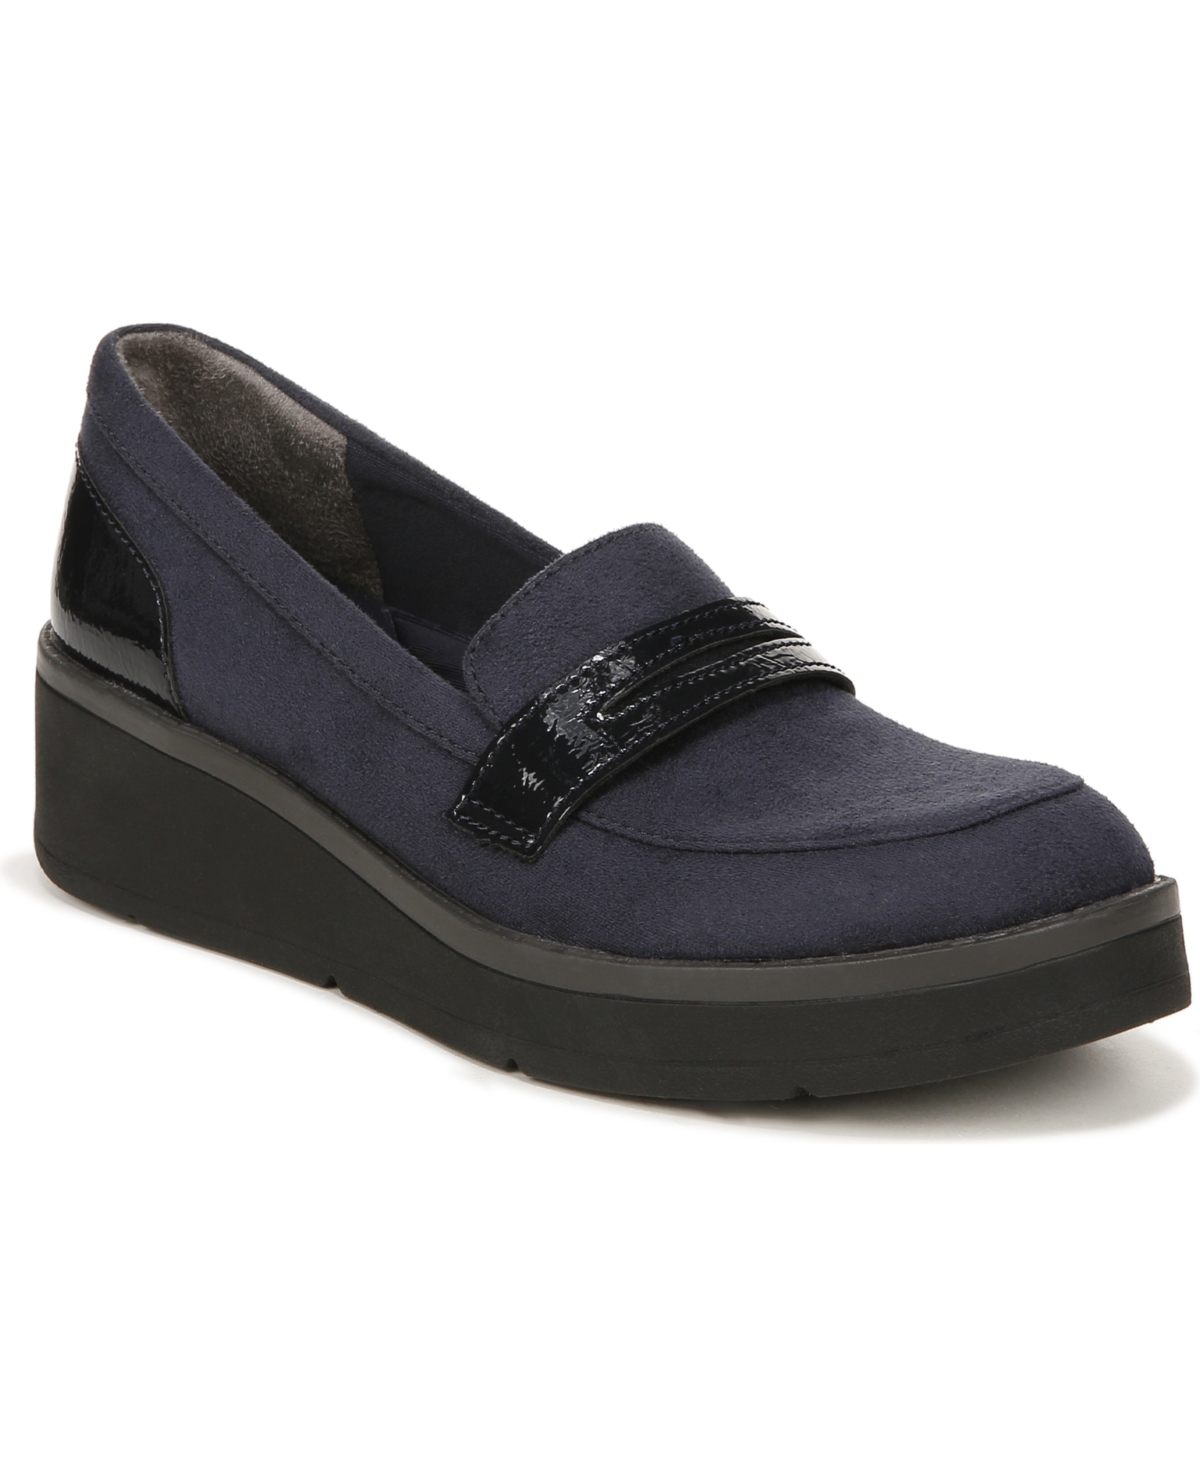 Fast Track Washable Loafers - Navy Microfiber/Faux Patent